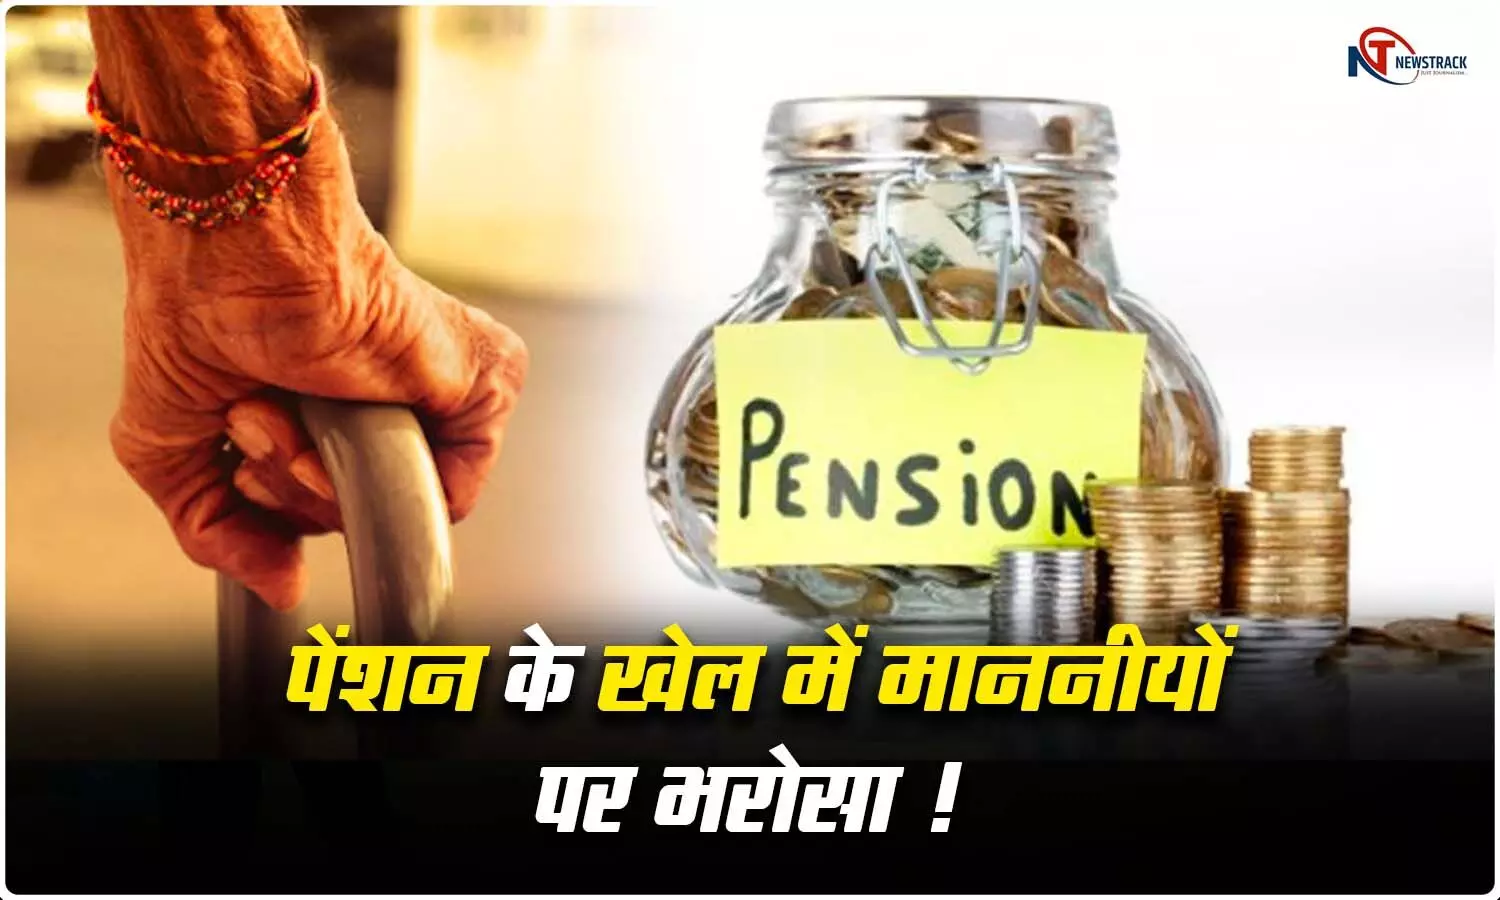 old pension scheme and new pension scheme controversy